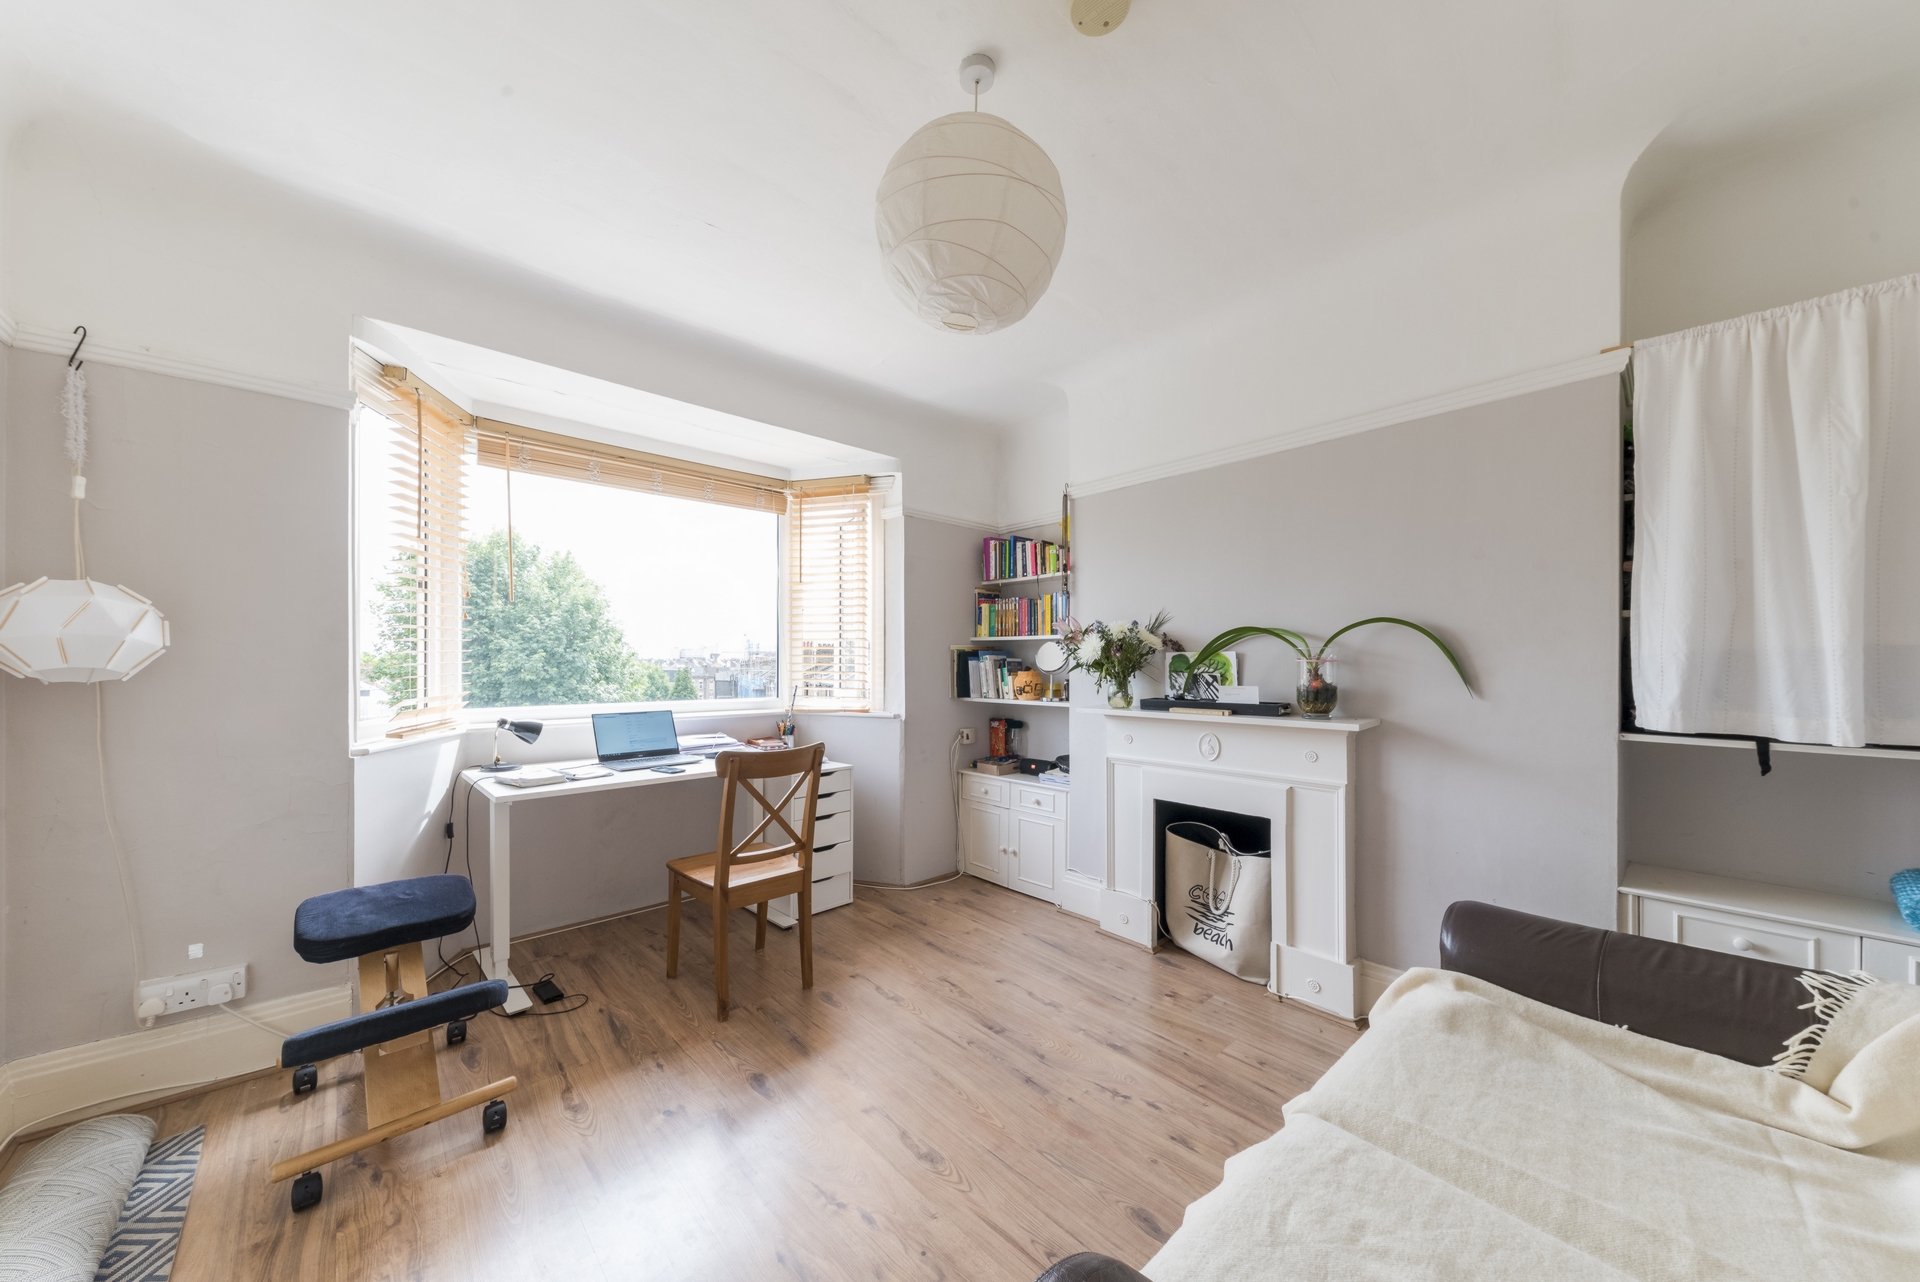 2 Bedroom Apartment to rent in West Hampstead, London, NW6